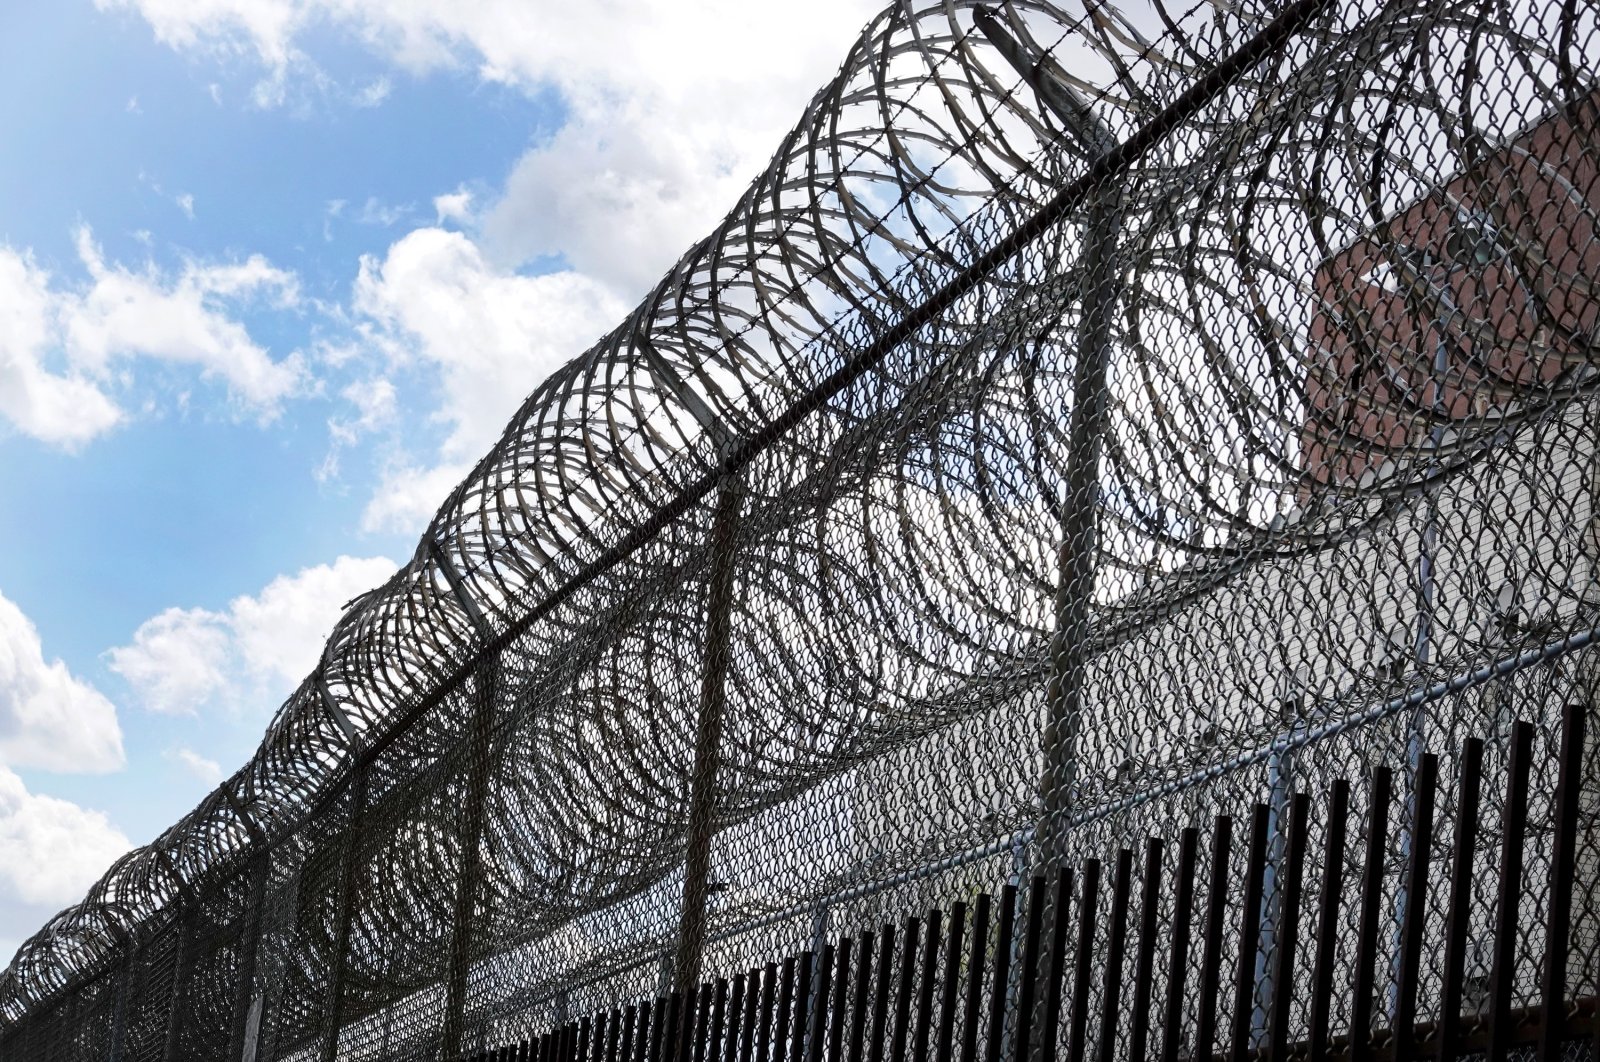 A fence surrounds the Cook County Jail, Chicago, Illinois, U.S., April 9, 2020. (Photo by Getty Images)